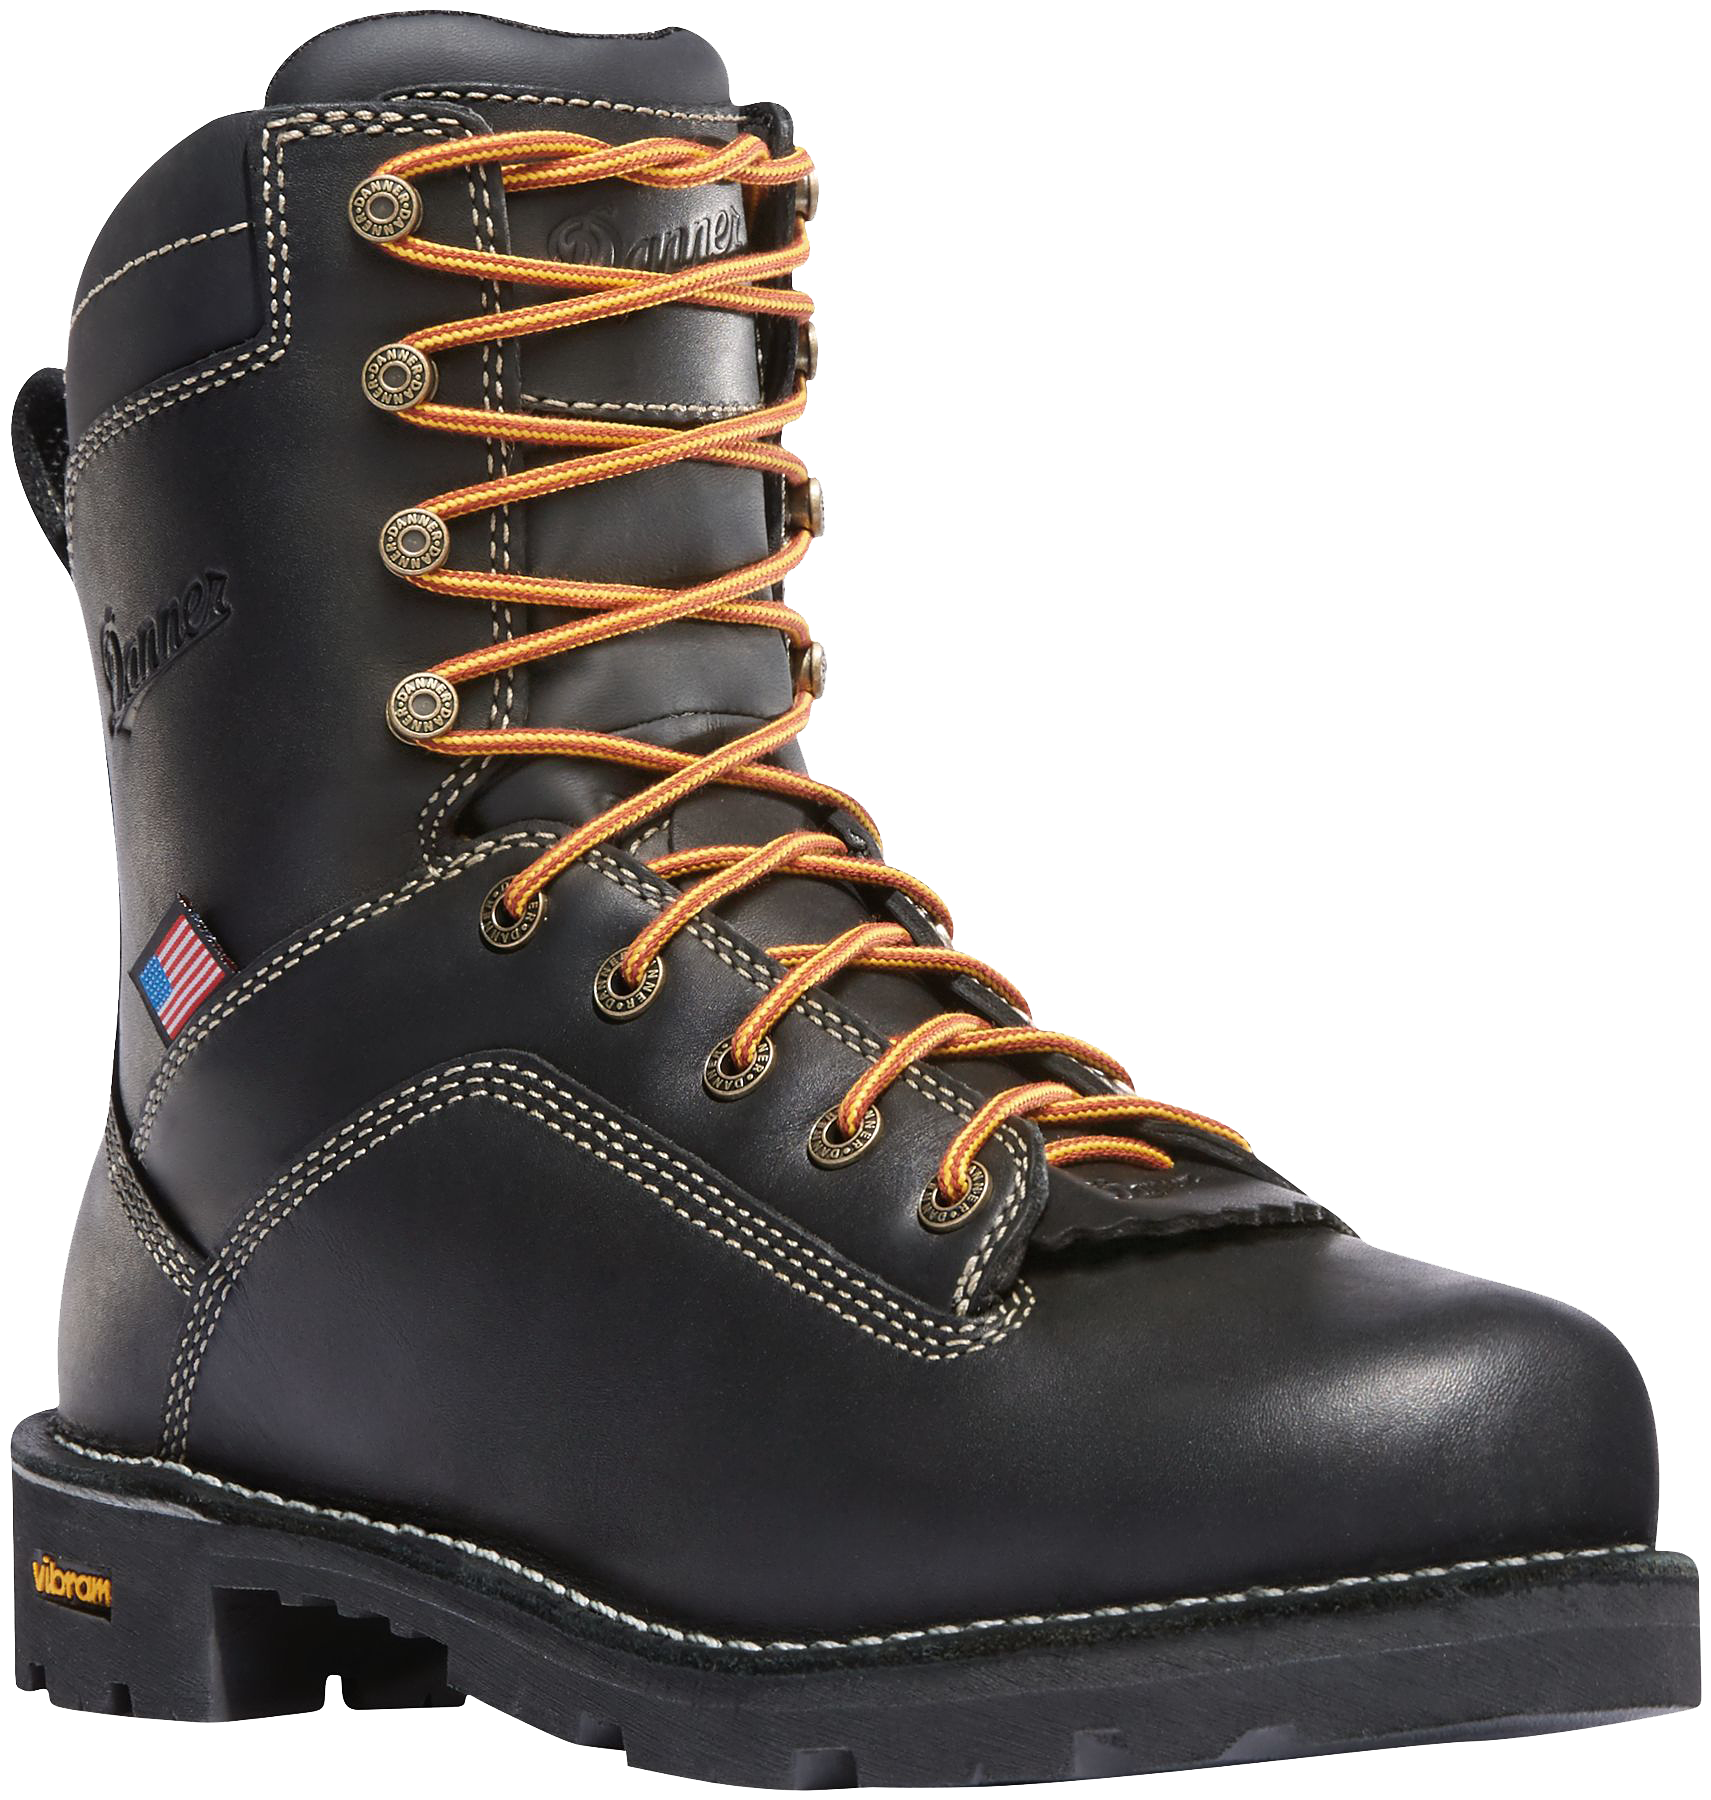 Danner Quarry USA Brown GORE-TEX Alloy Toe Work Boots for Men - Black - 10.5W